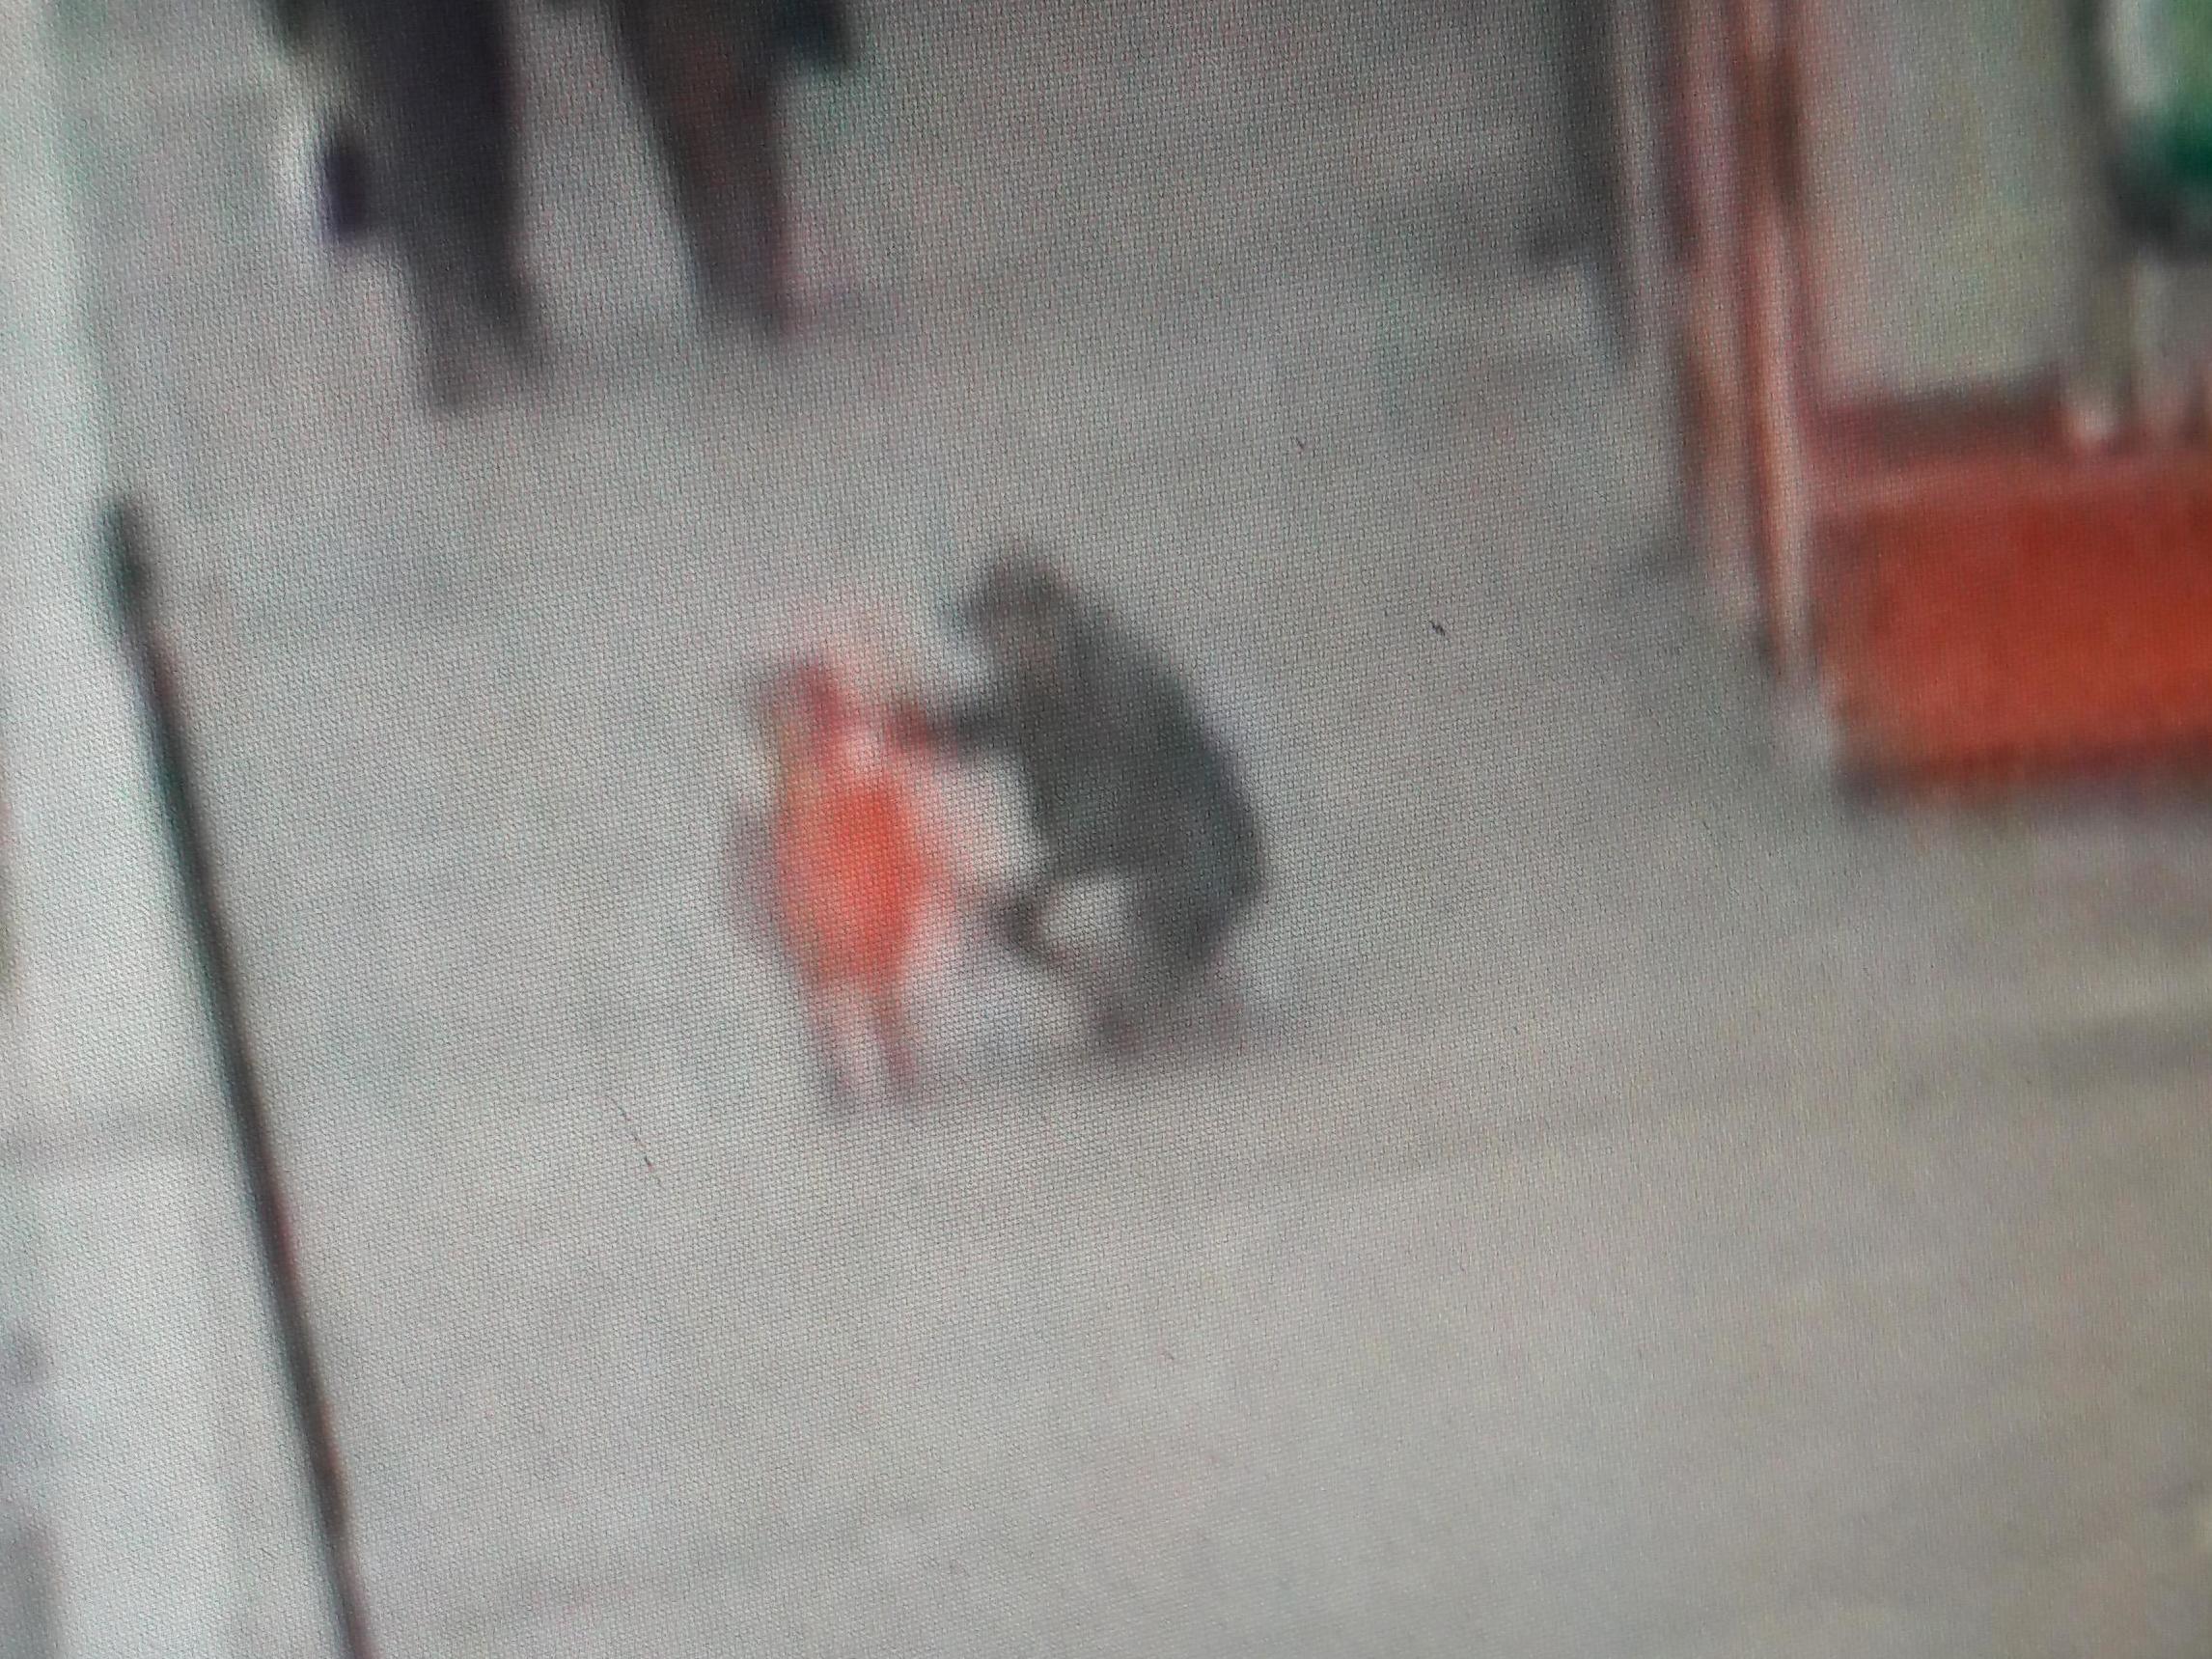 Police have released CCTV of a man and a girl after a report of "a possible child abduction"